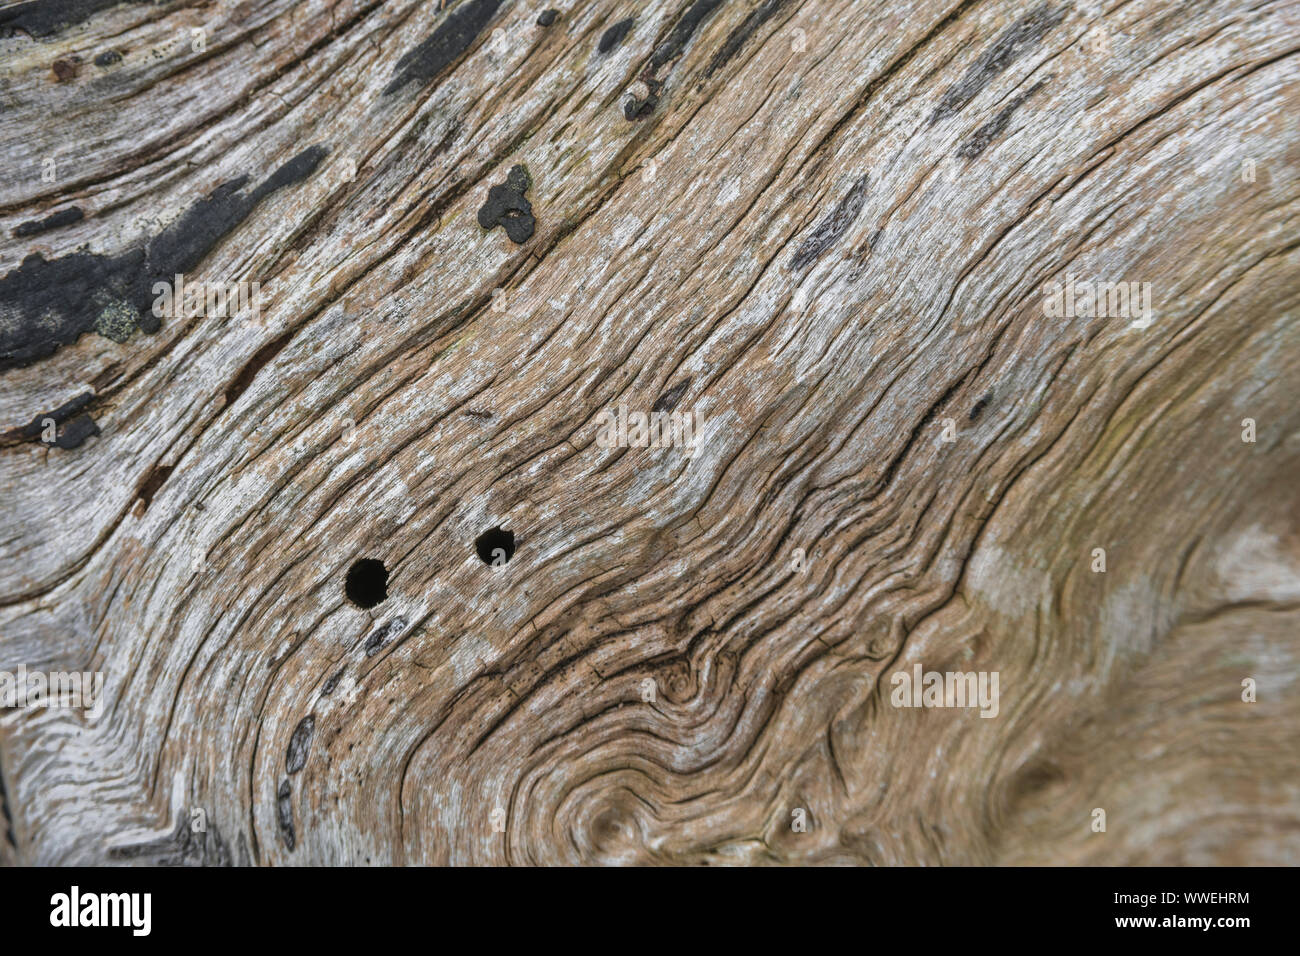 Macro close-up shot of rotting tree trunk wood texture. Curved trunk gives shallow DoF with focus limited to central image parts & rest falling away. Stock Photo